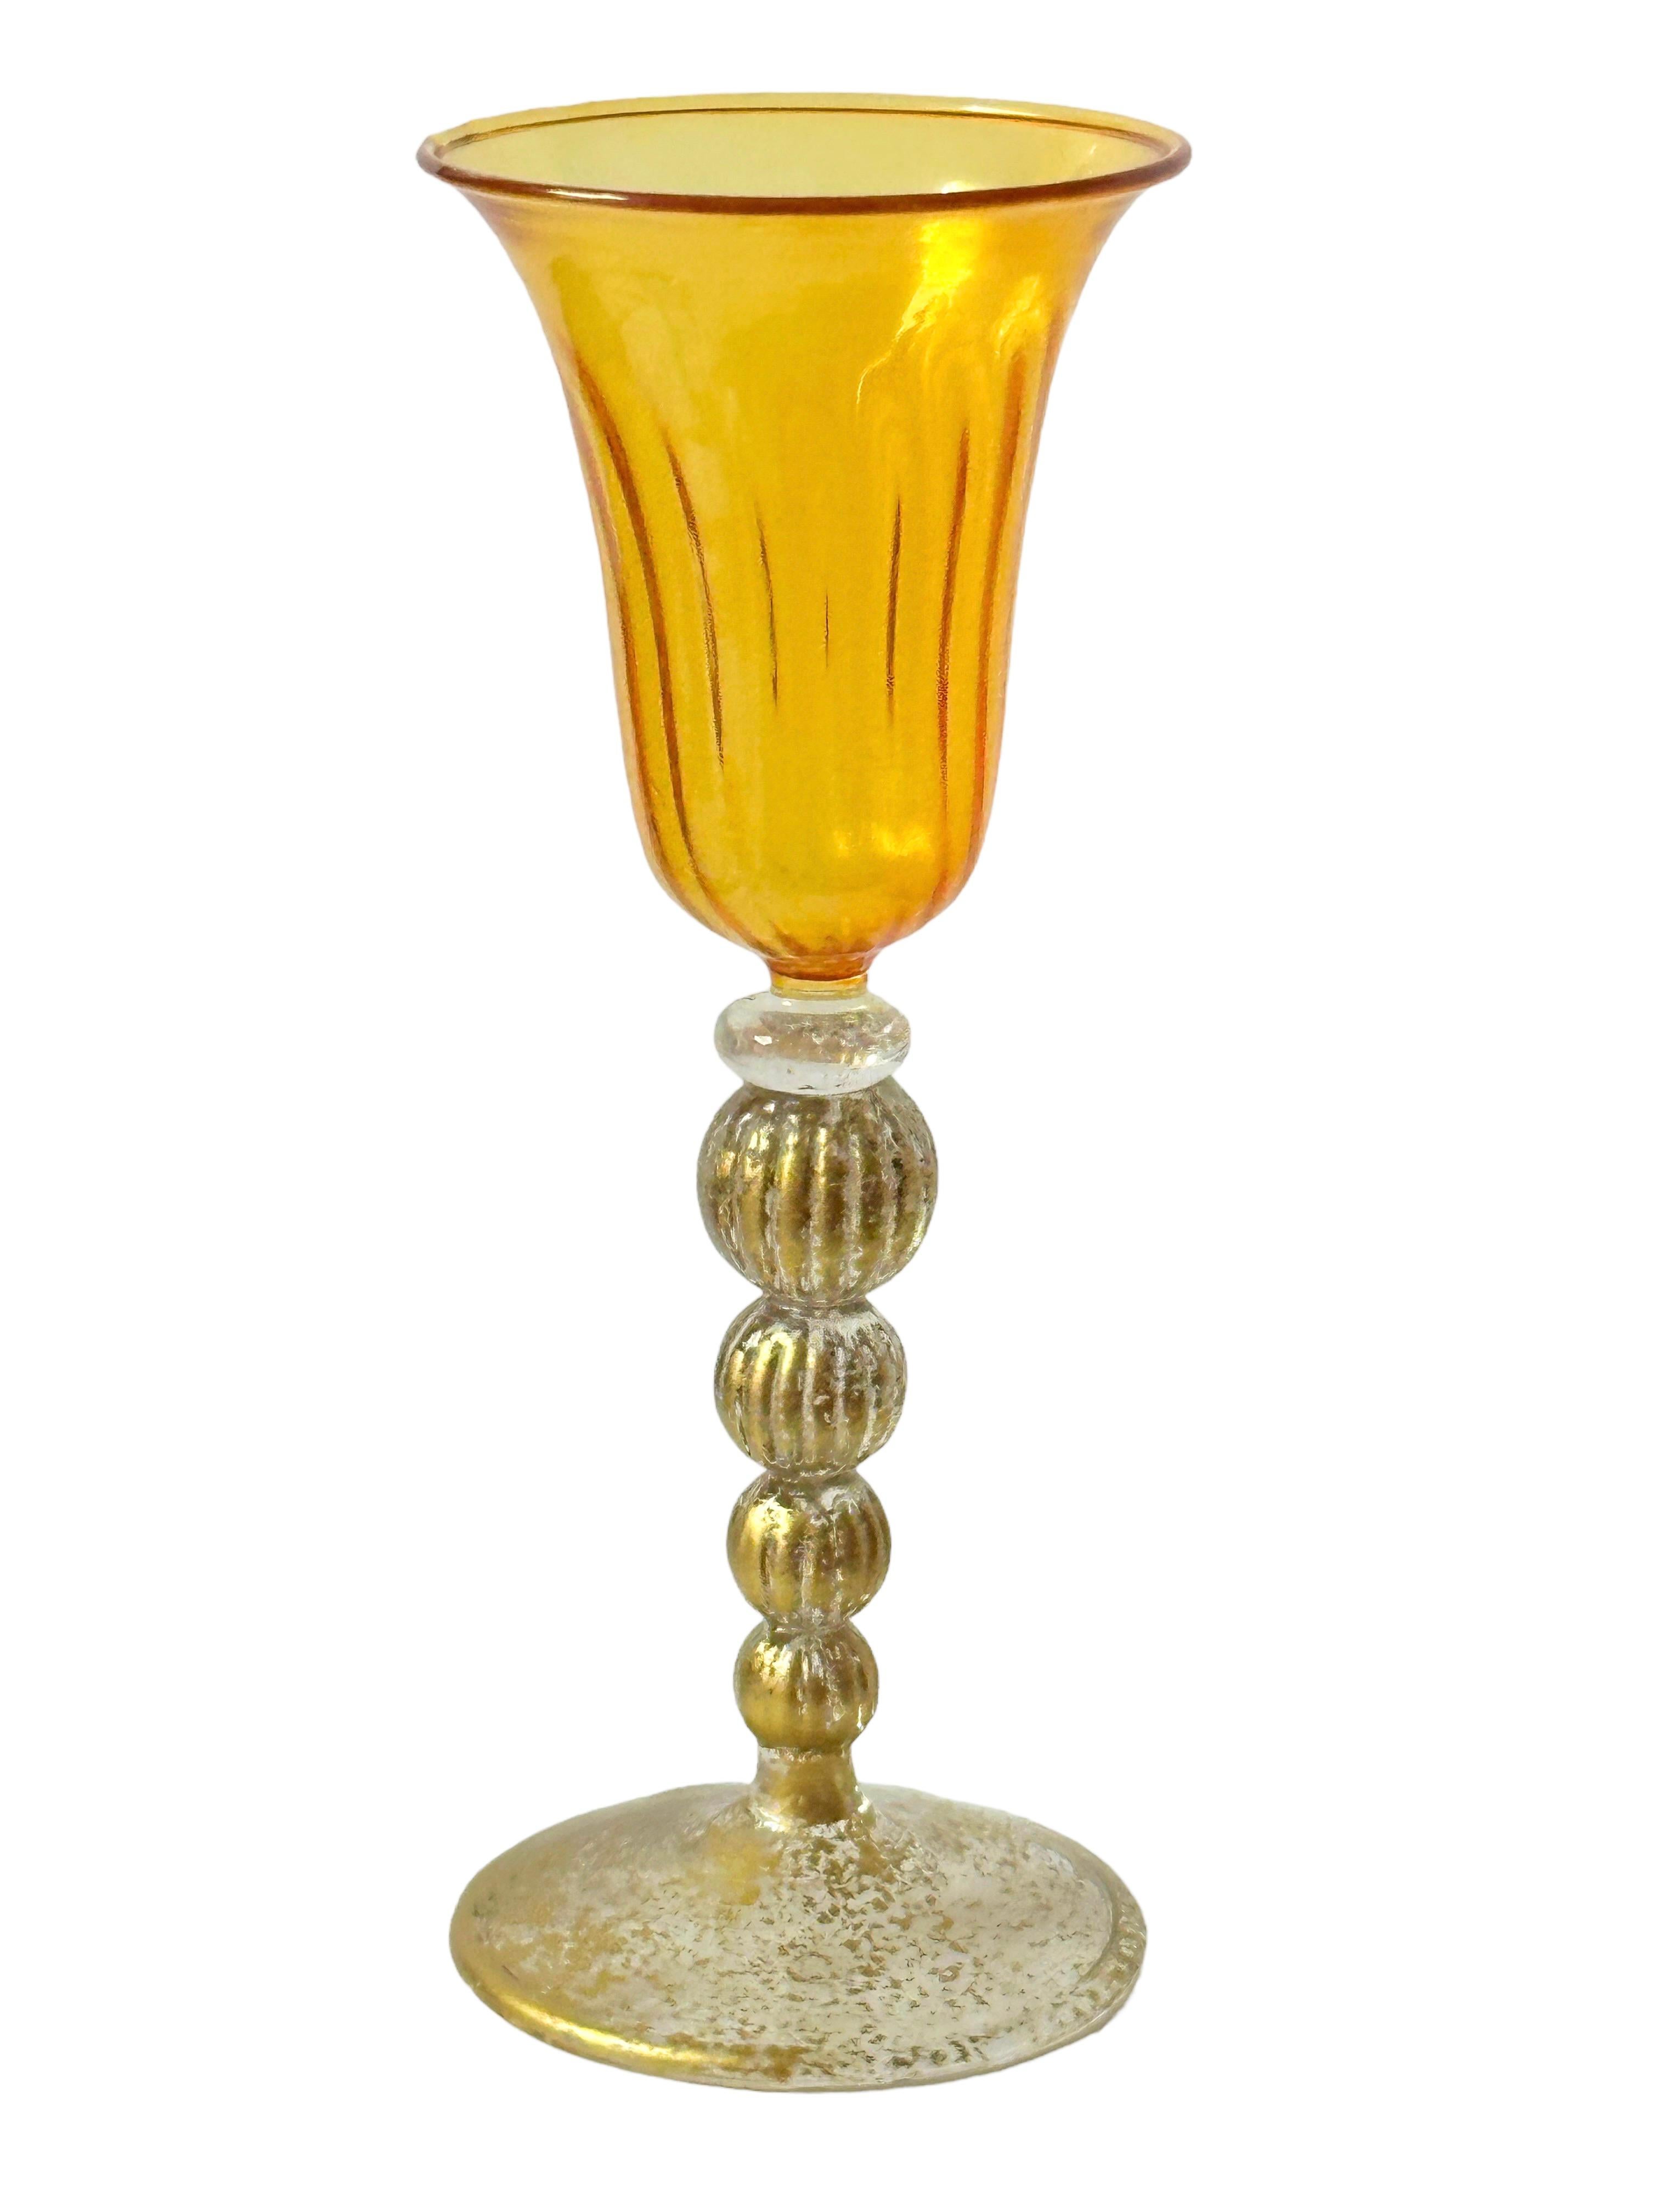 Amber & Gold Stardust Salviati Murano Glass Liqueur Goblet, Vintage Italy  In Good Condition For Sale In Nuernberg, DE